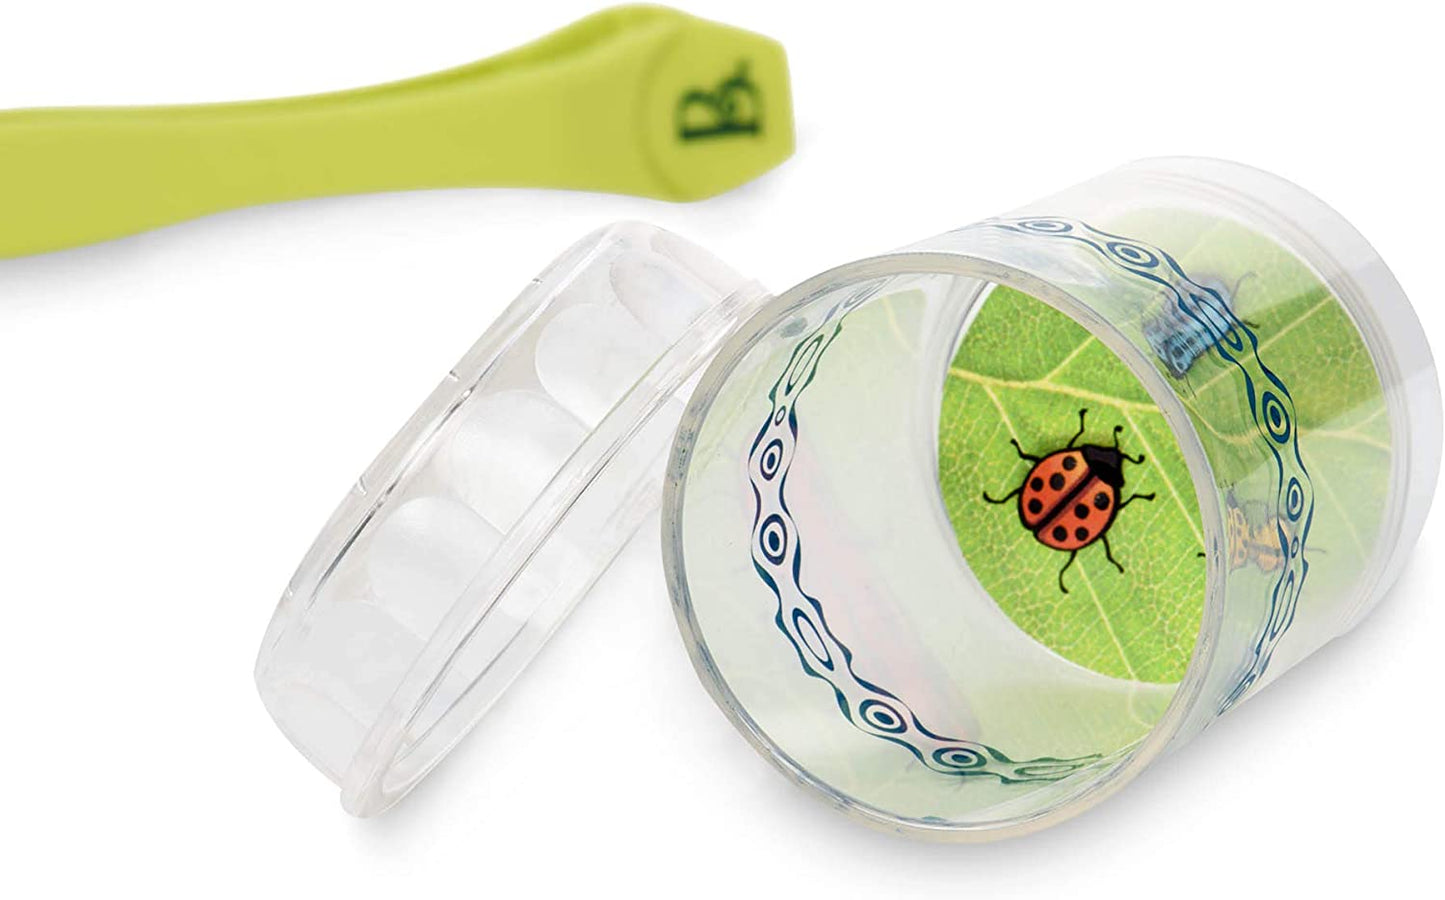 - Bug Bungalow- Bug Catching Kit- Sports & Outdoors- Insect Catching Set- Summer Toys- Educational & Developmental – 3 Years +